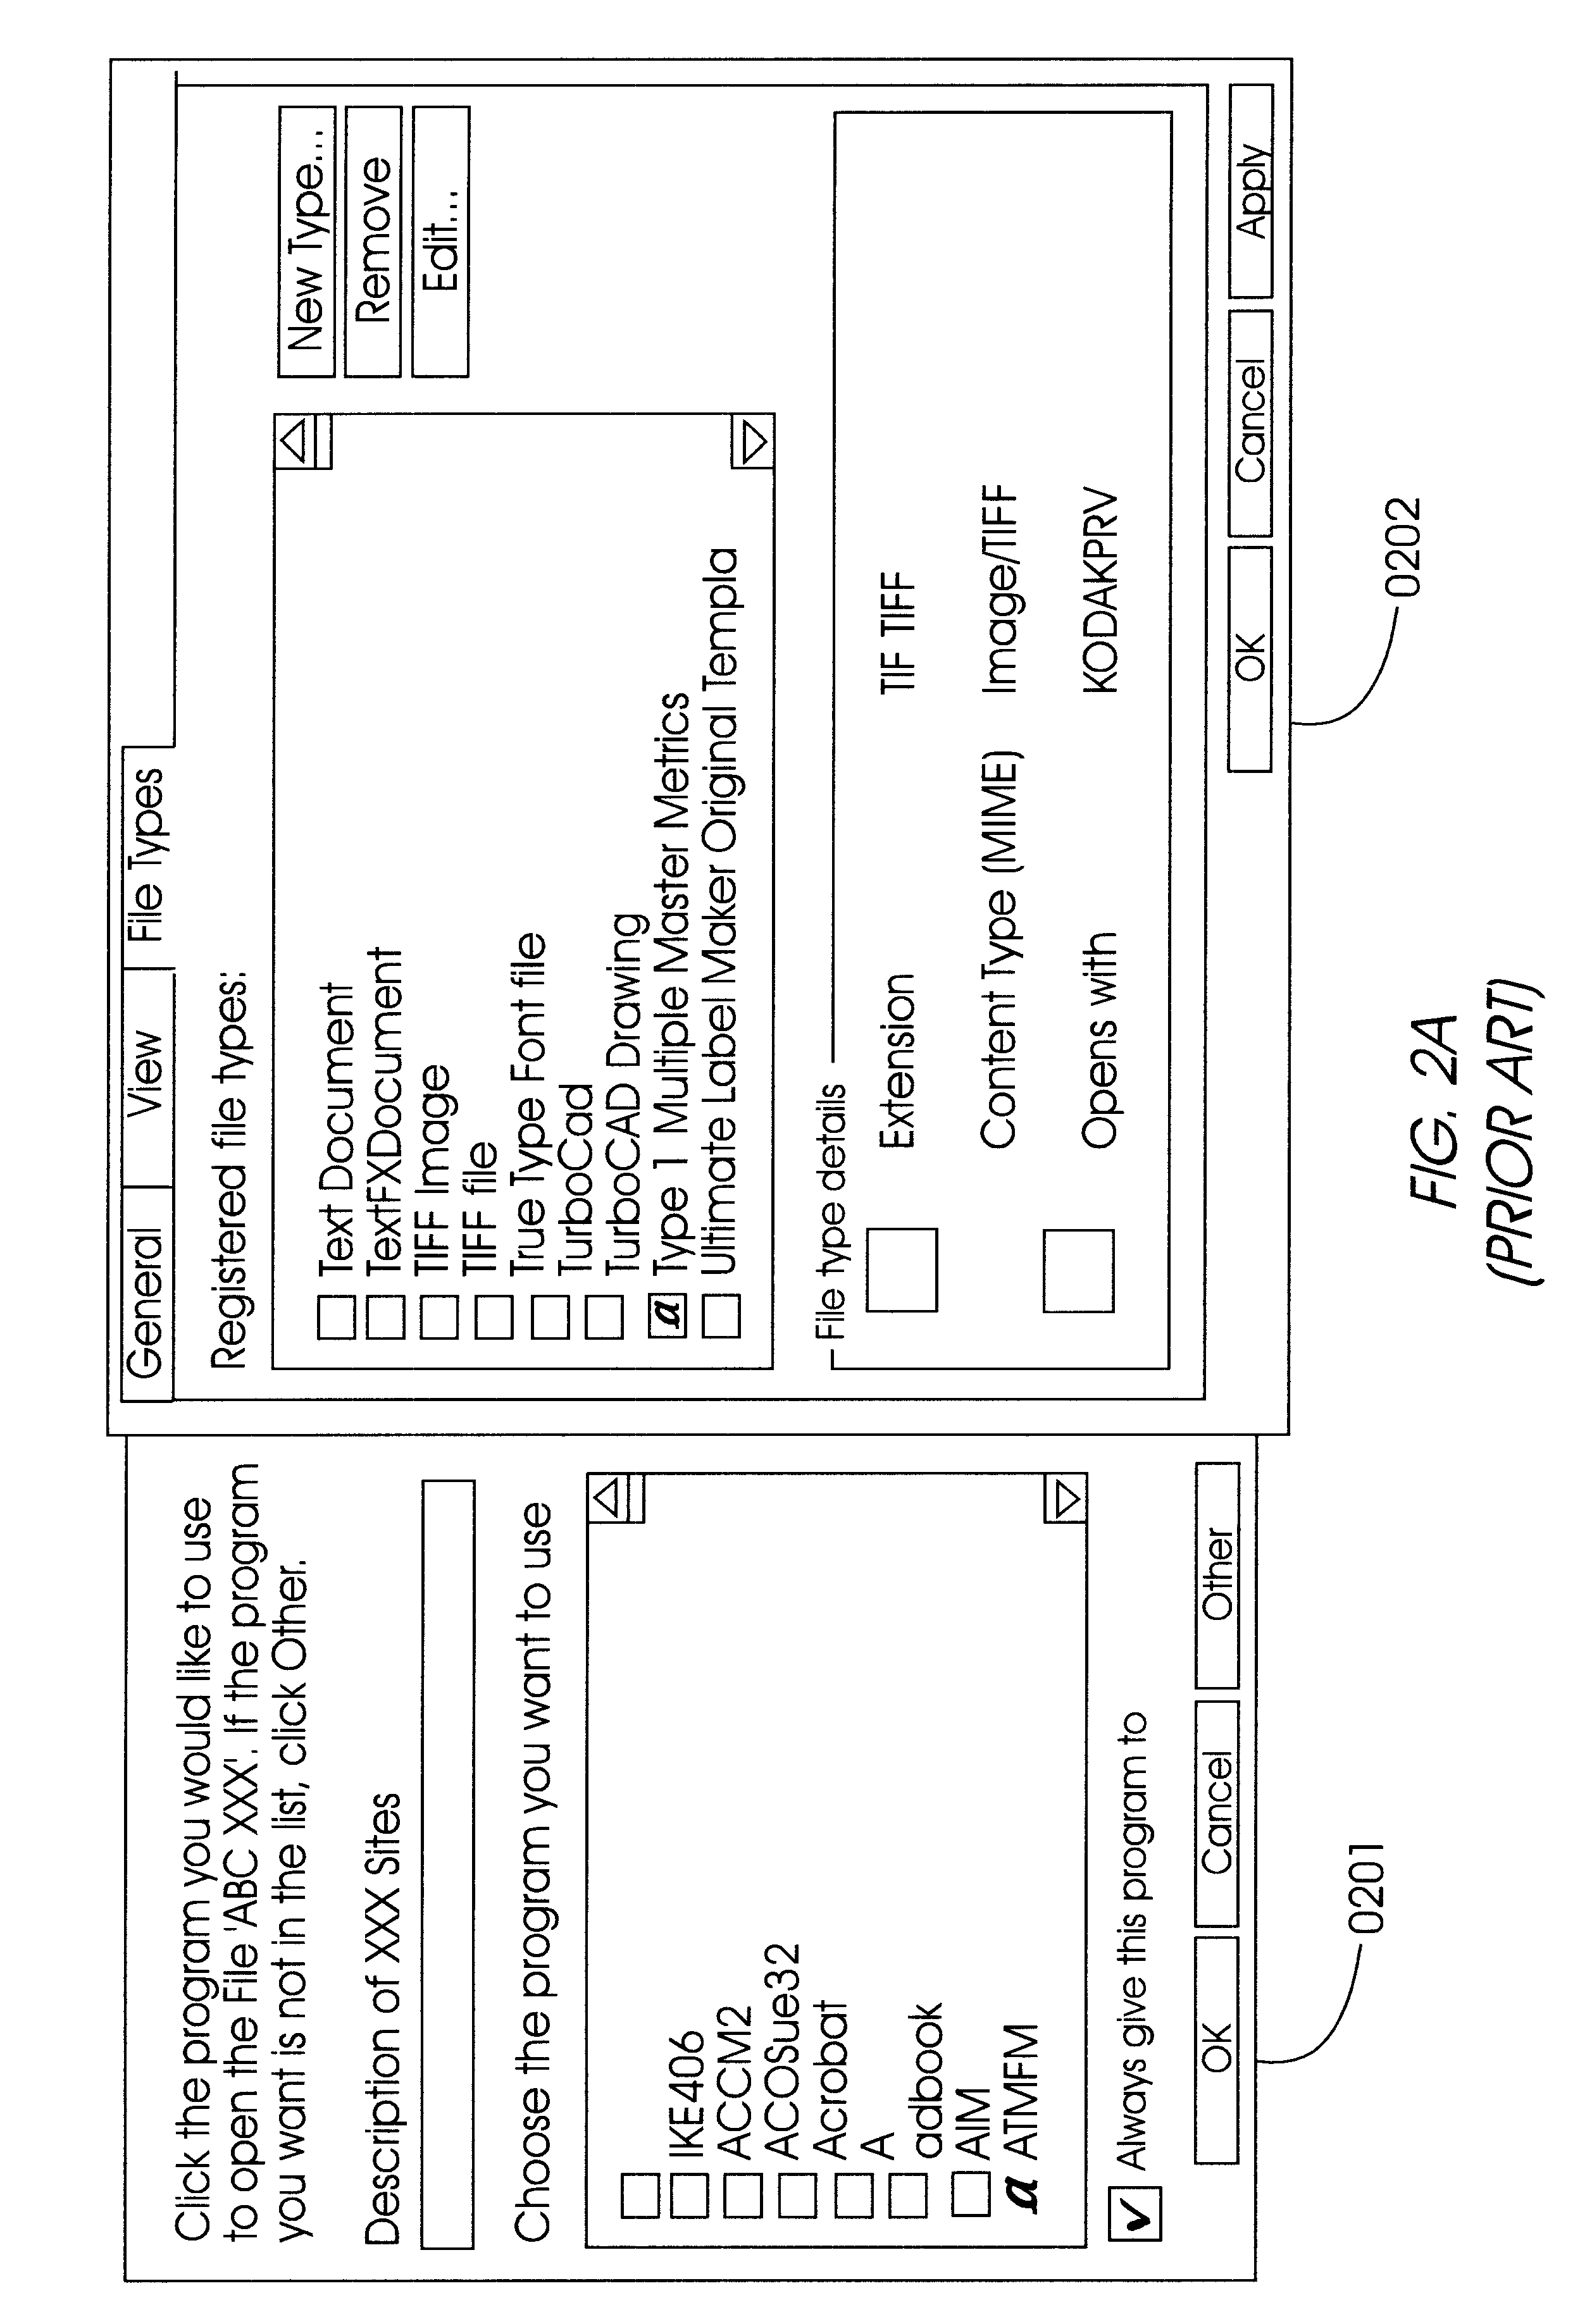 System and method for registering and providing a tool service